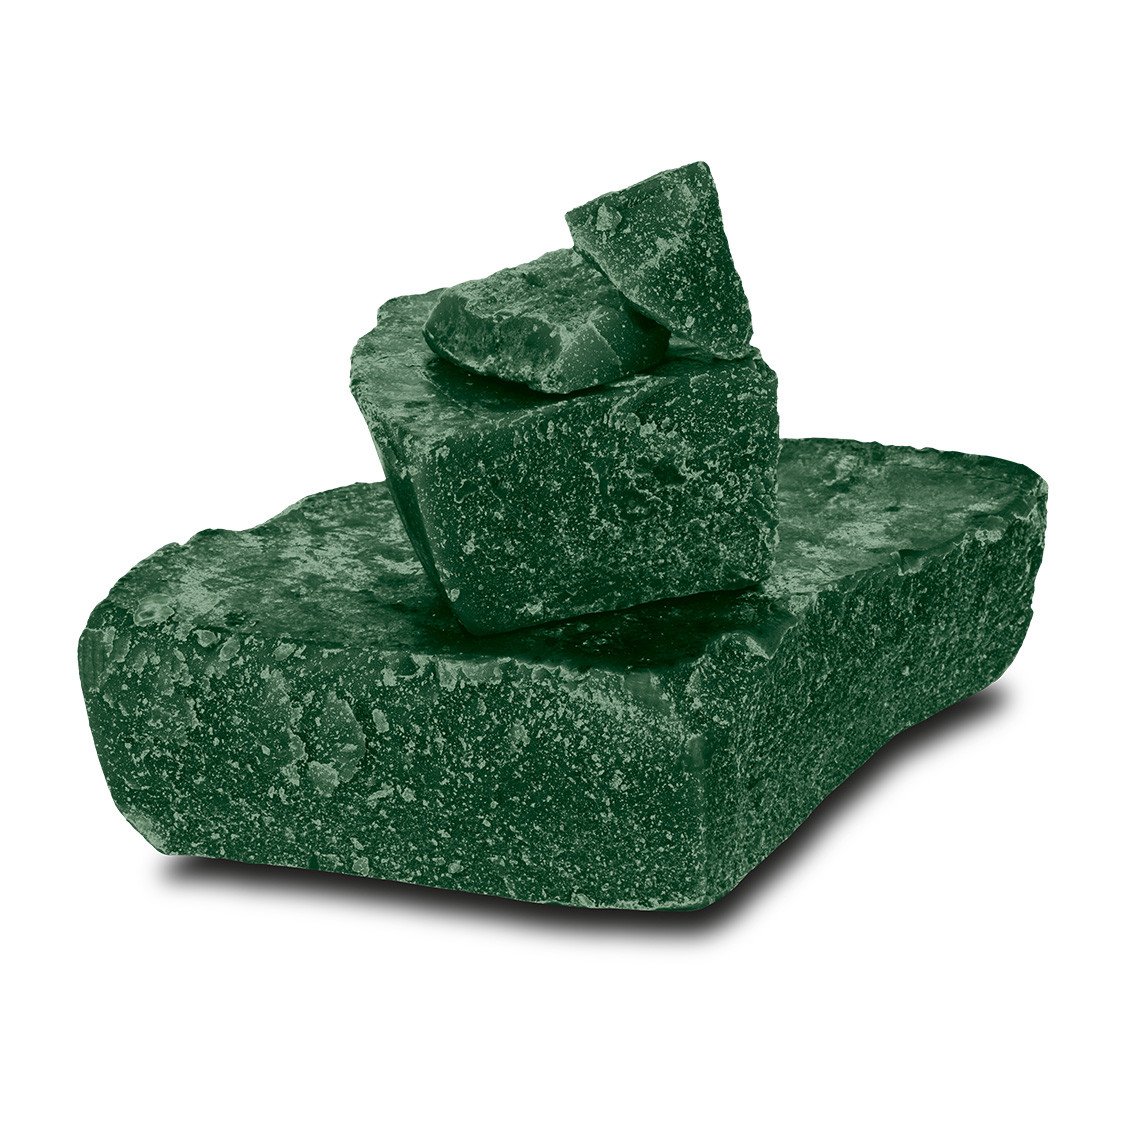 Green epilating wax with beeswax 1 kg